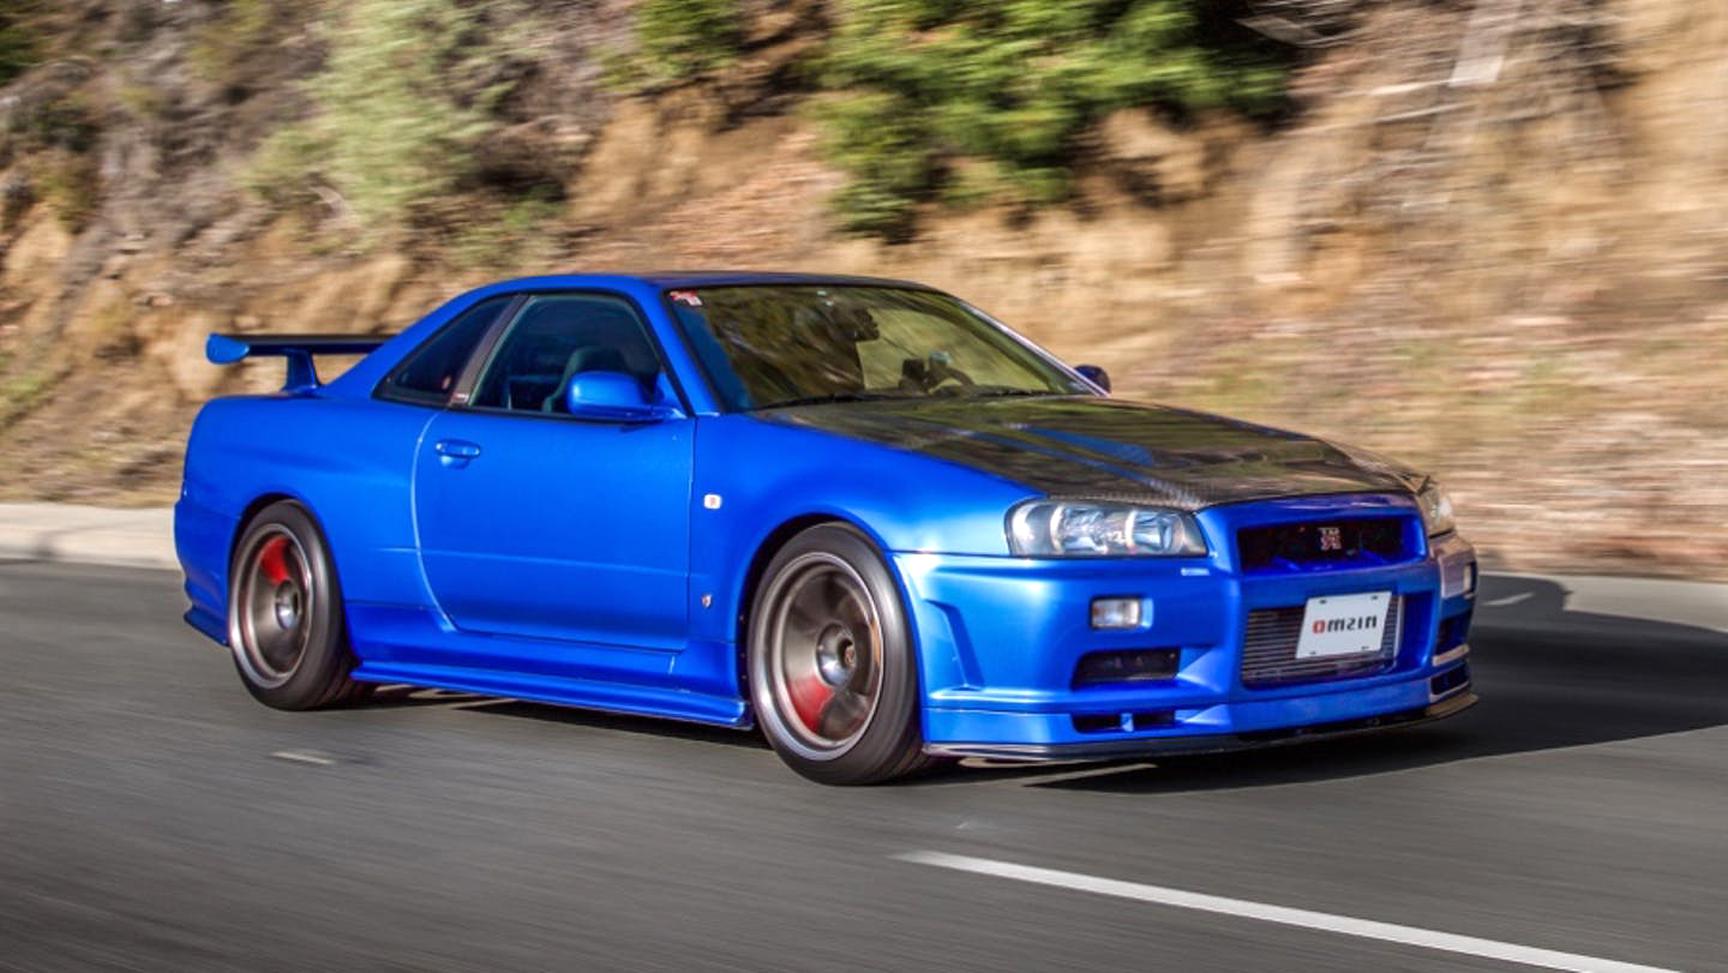 The Skyline R34 For Sale In UK